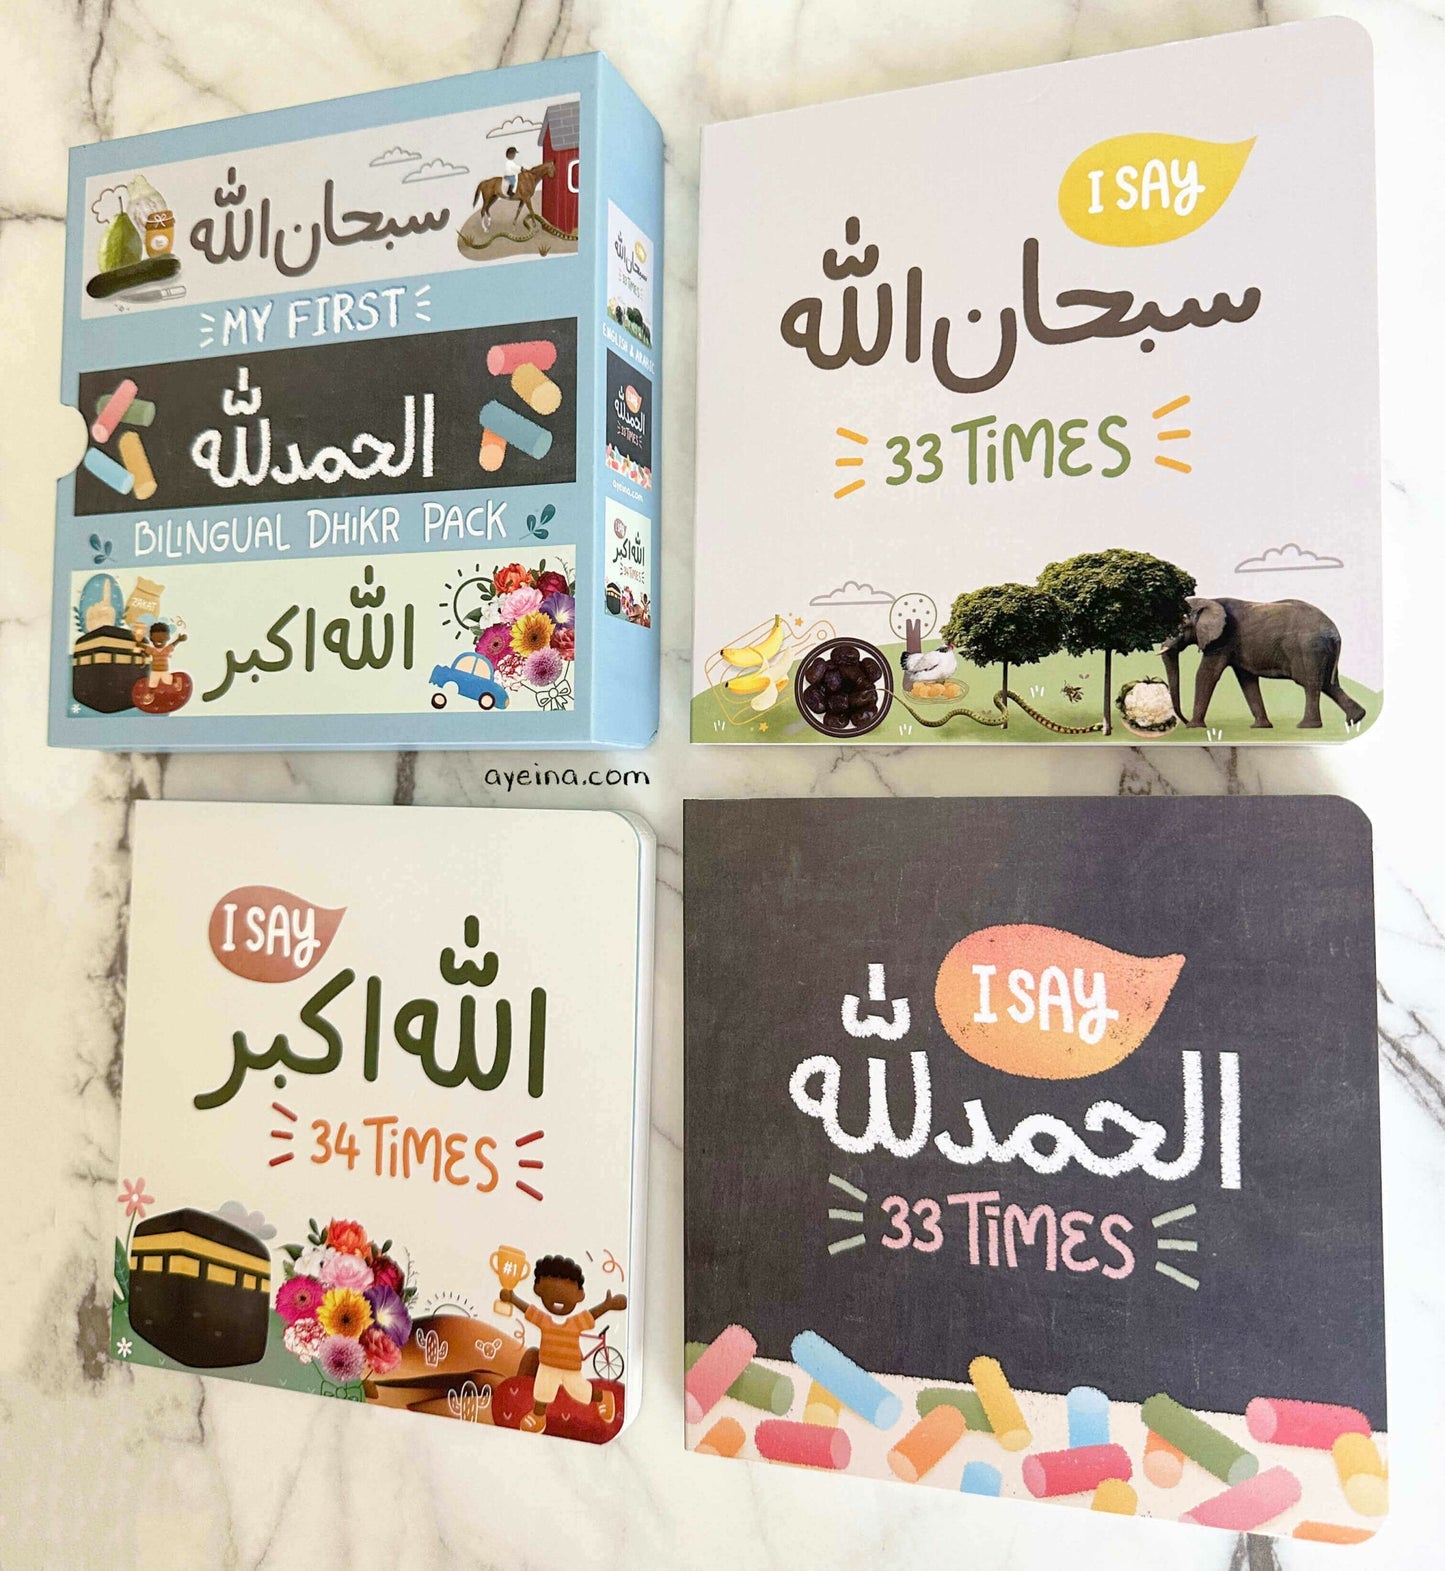 My First Bilingual Dhikr Pack - Set of 3 Board Books